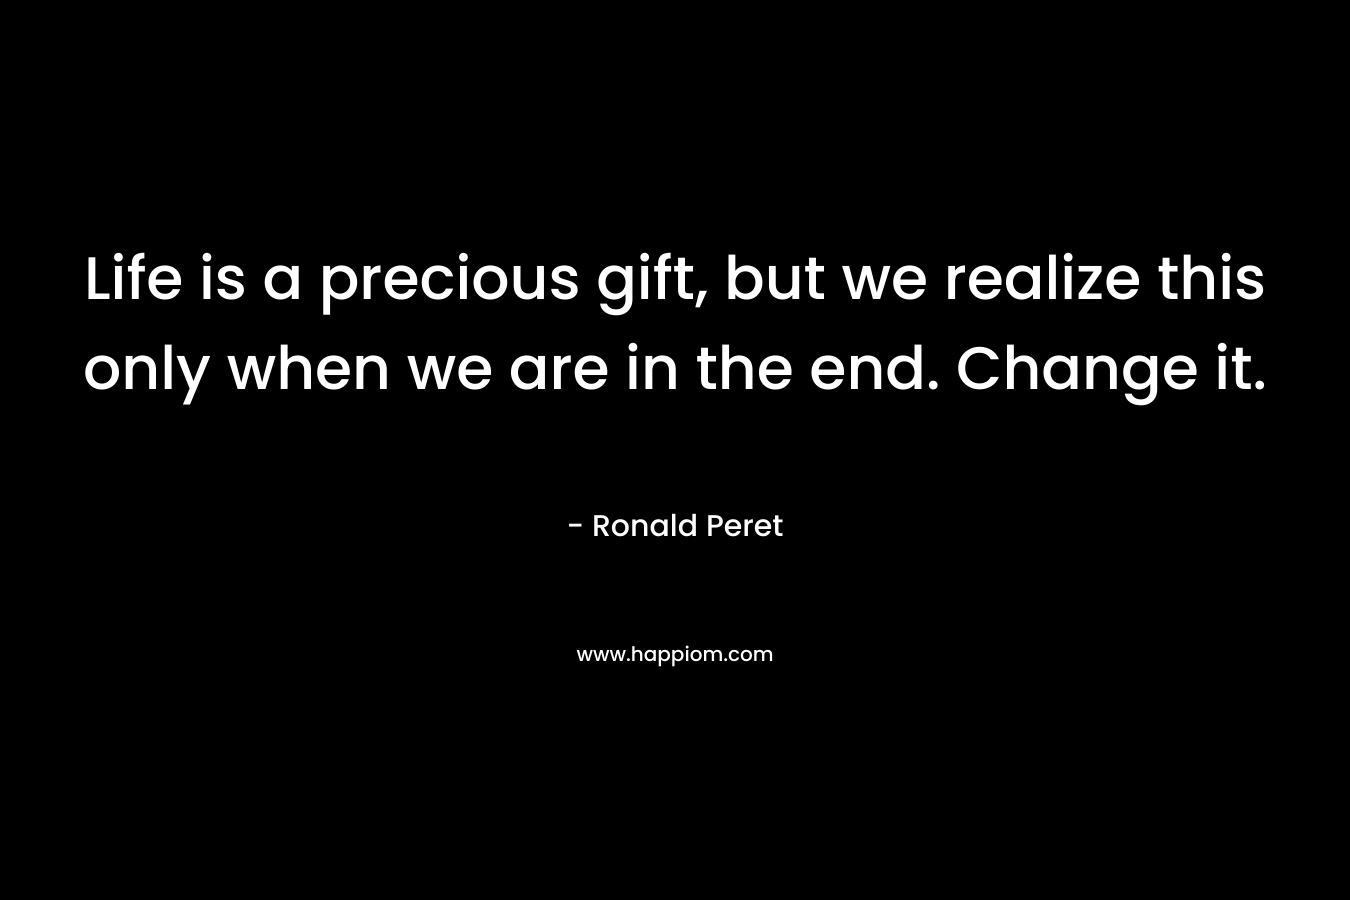 Life is a precious gift, but we realize this only when we are in the end. Change it.